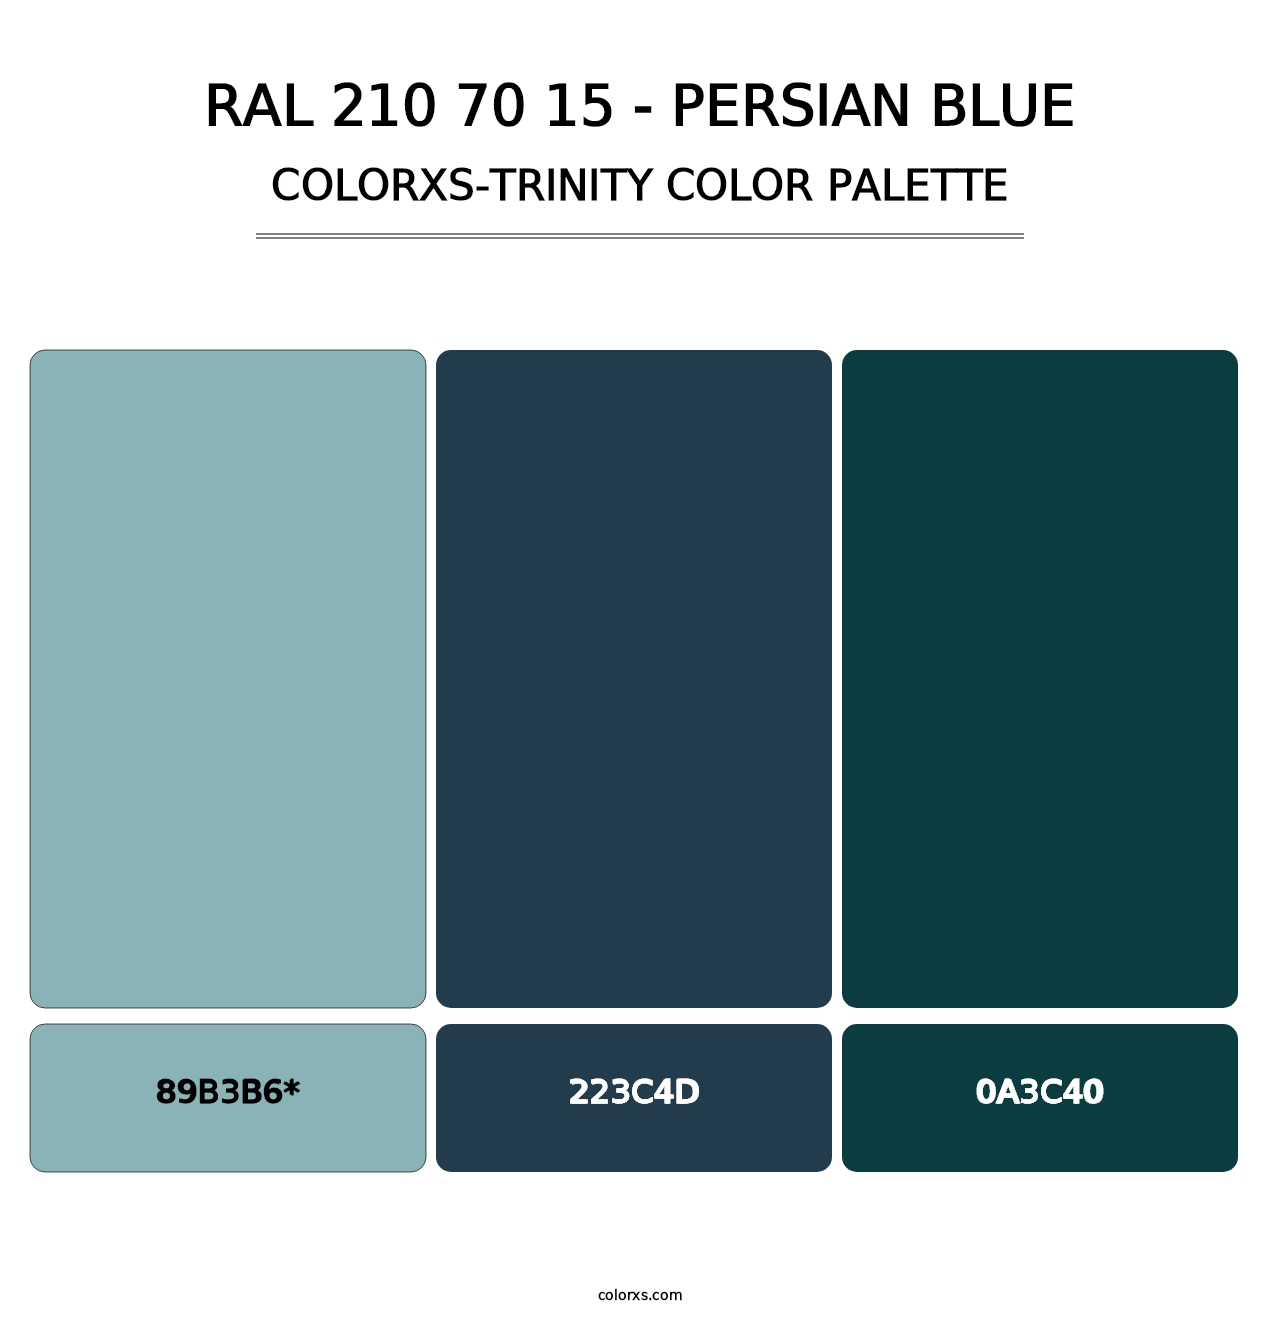 RAL 210 70 15 - Persian Blue - Colorxs Trinity Palette